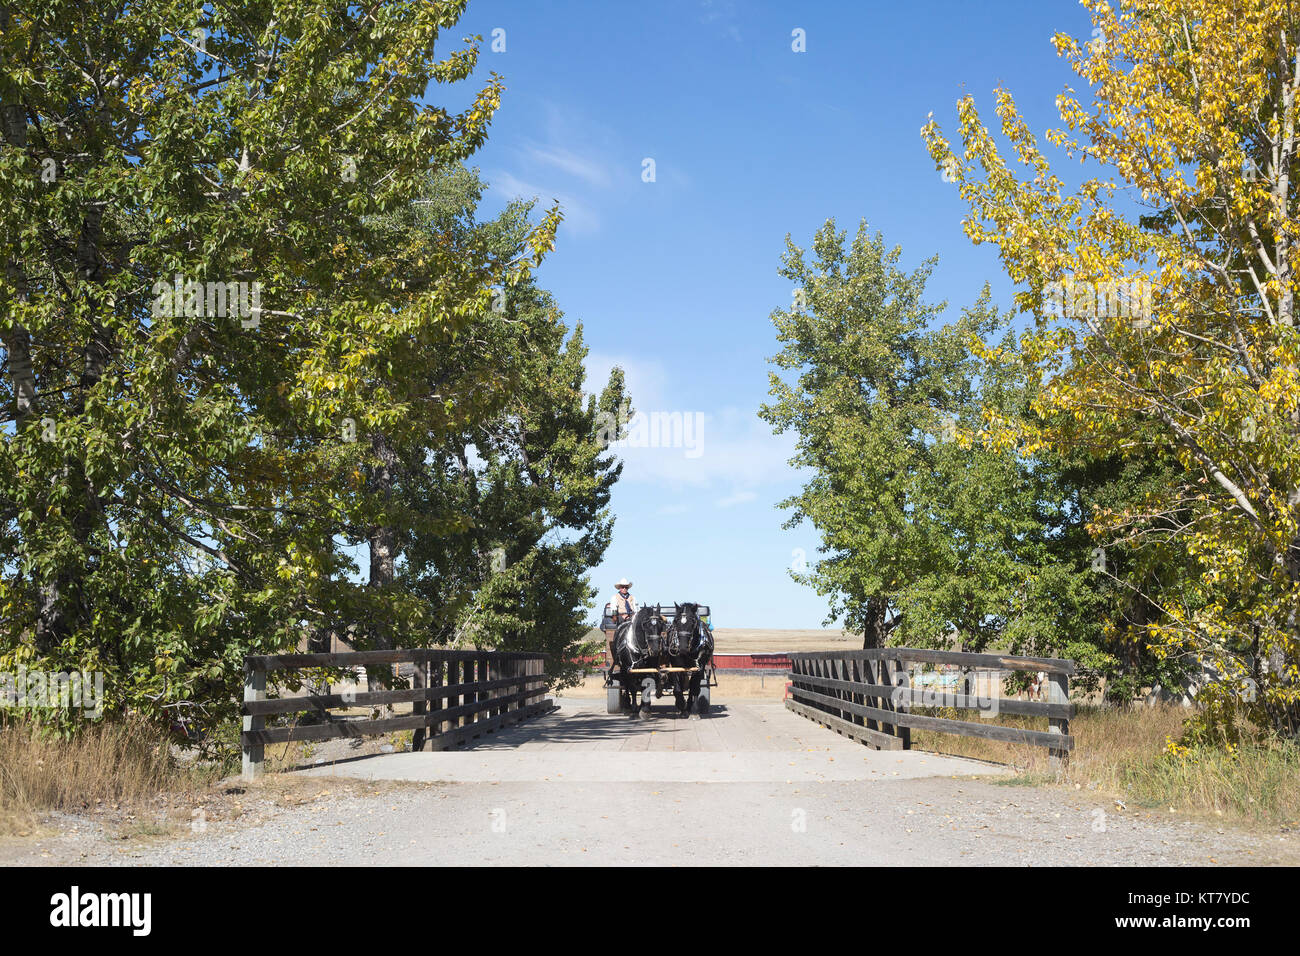 Horse drawn carriage serving as the local tourist taxi at Bar U Ranch National Historic Site, crossing a bridge Stock Photo